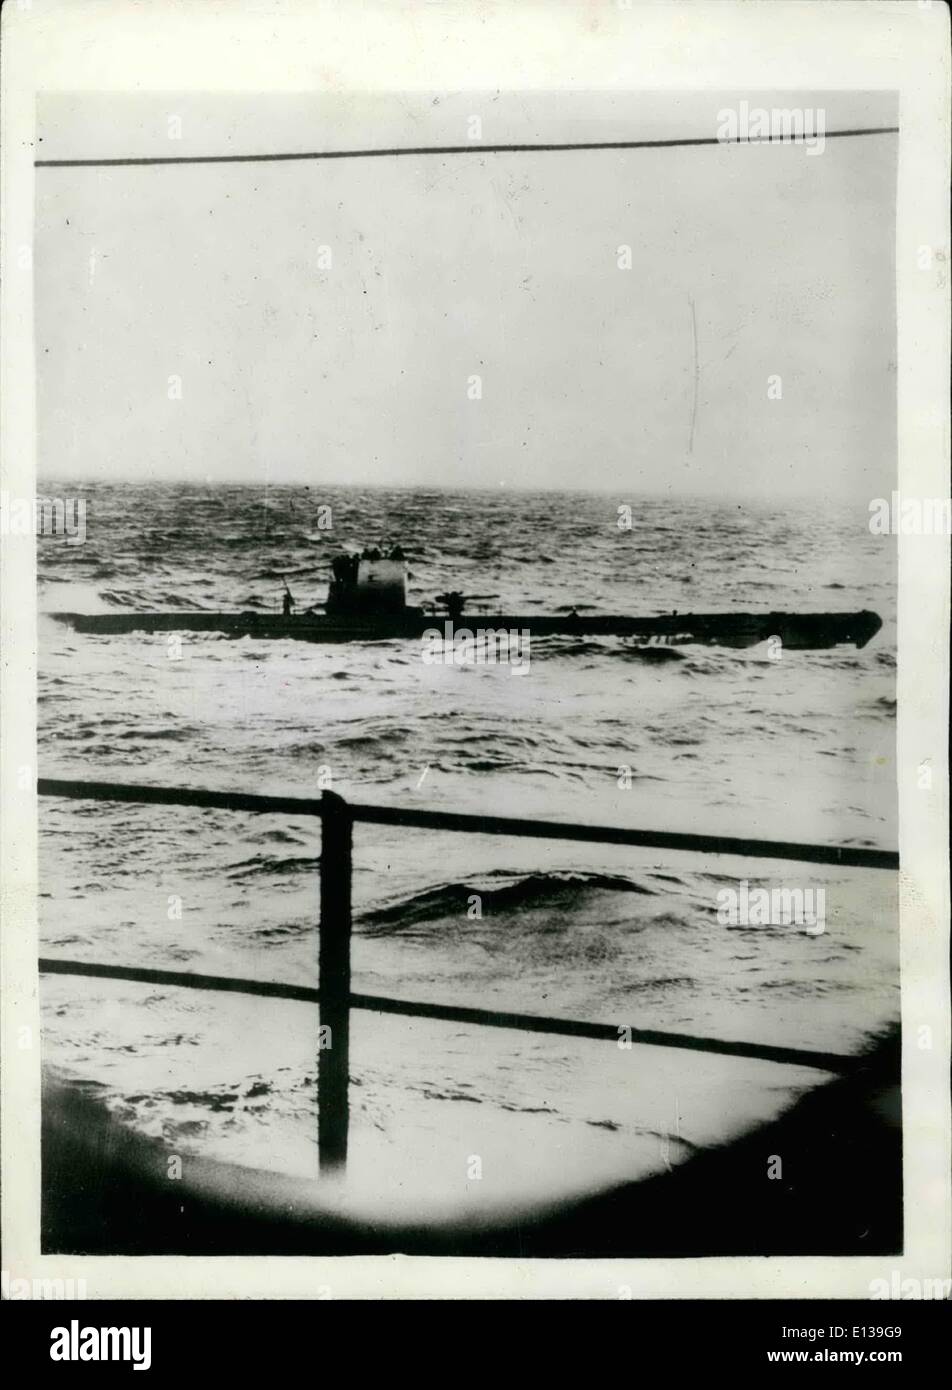 Feb. 29, 2012 - A German U-Boat about a ship's length from the U.S. freighter Waccsta, the first U.S. Ship to tbe stopped by a U-Boat somewhere in the Atlantic. The U-Boat fired at a shell across the bow of the ship. The ship lowered a lifeboat and took the Captain on board for a search. Stock Photo